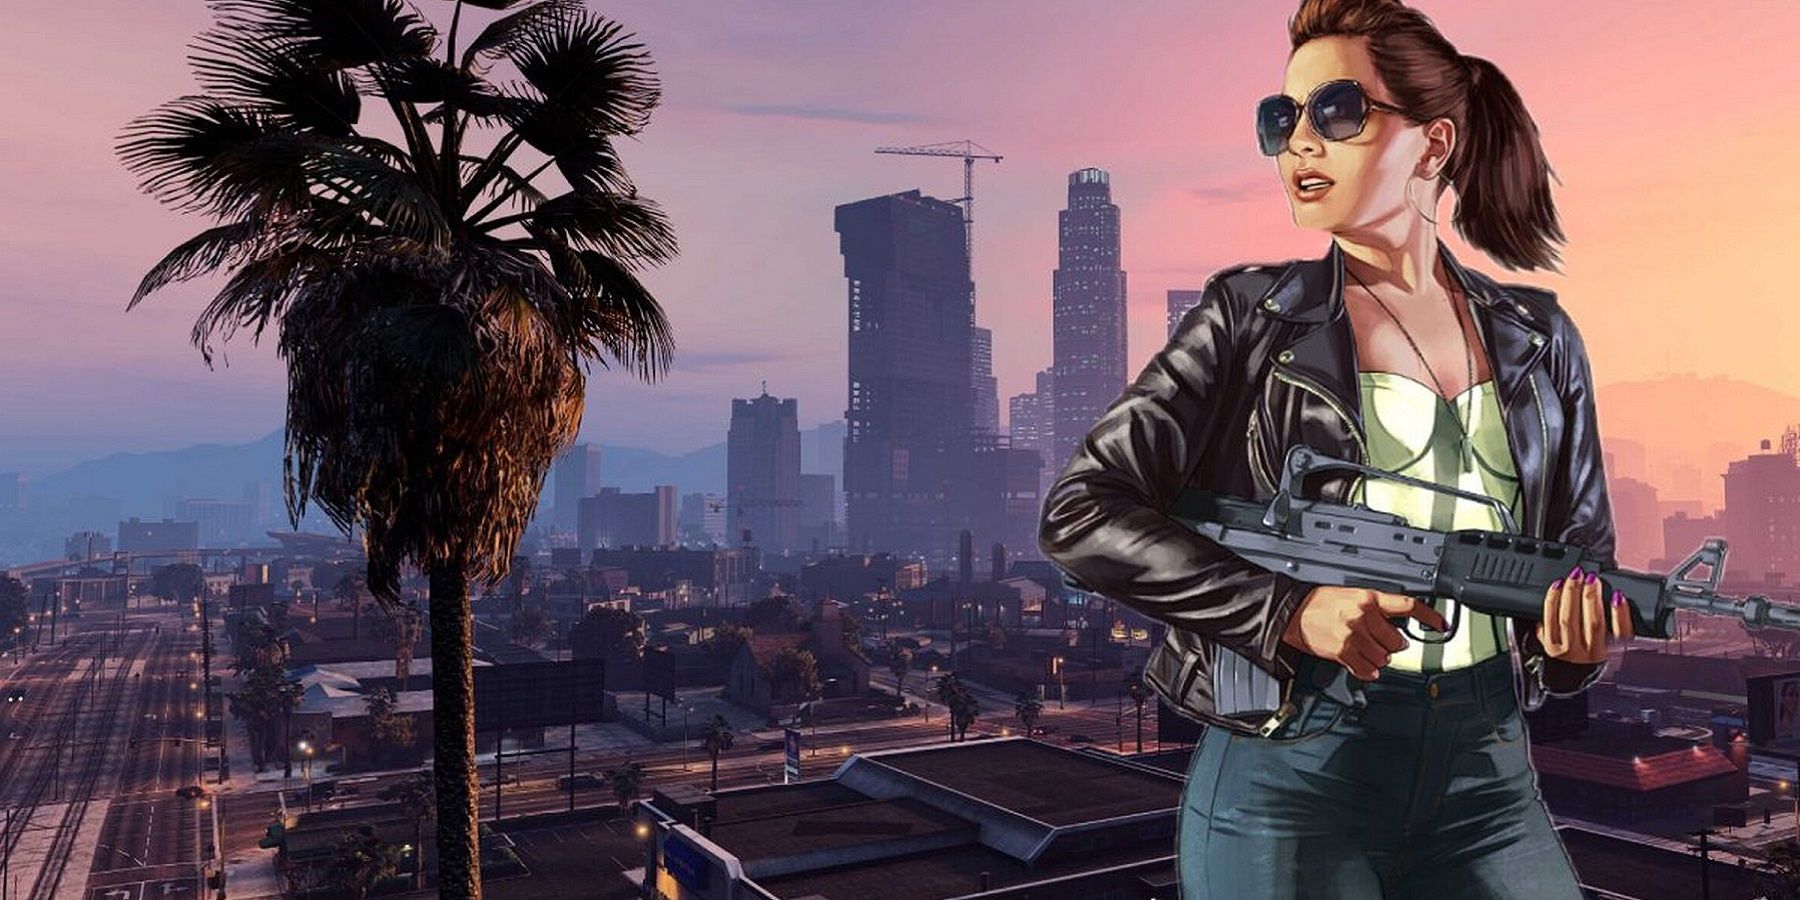 Grand Theft Auto concept image showing a woman holding a rifle with GTA5's Los Santos as the backdrop.